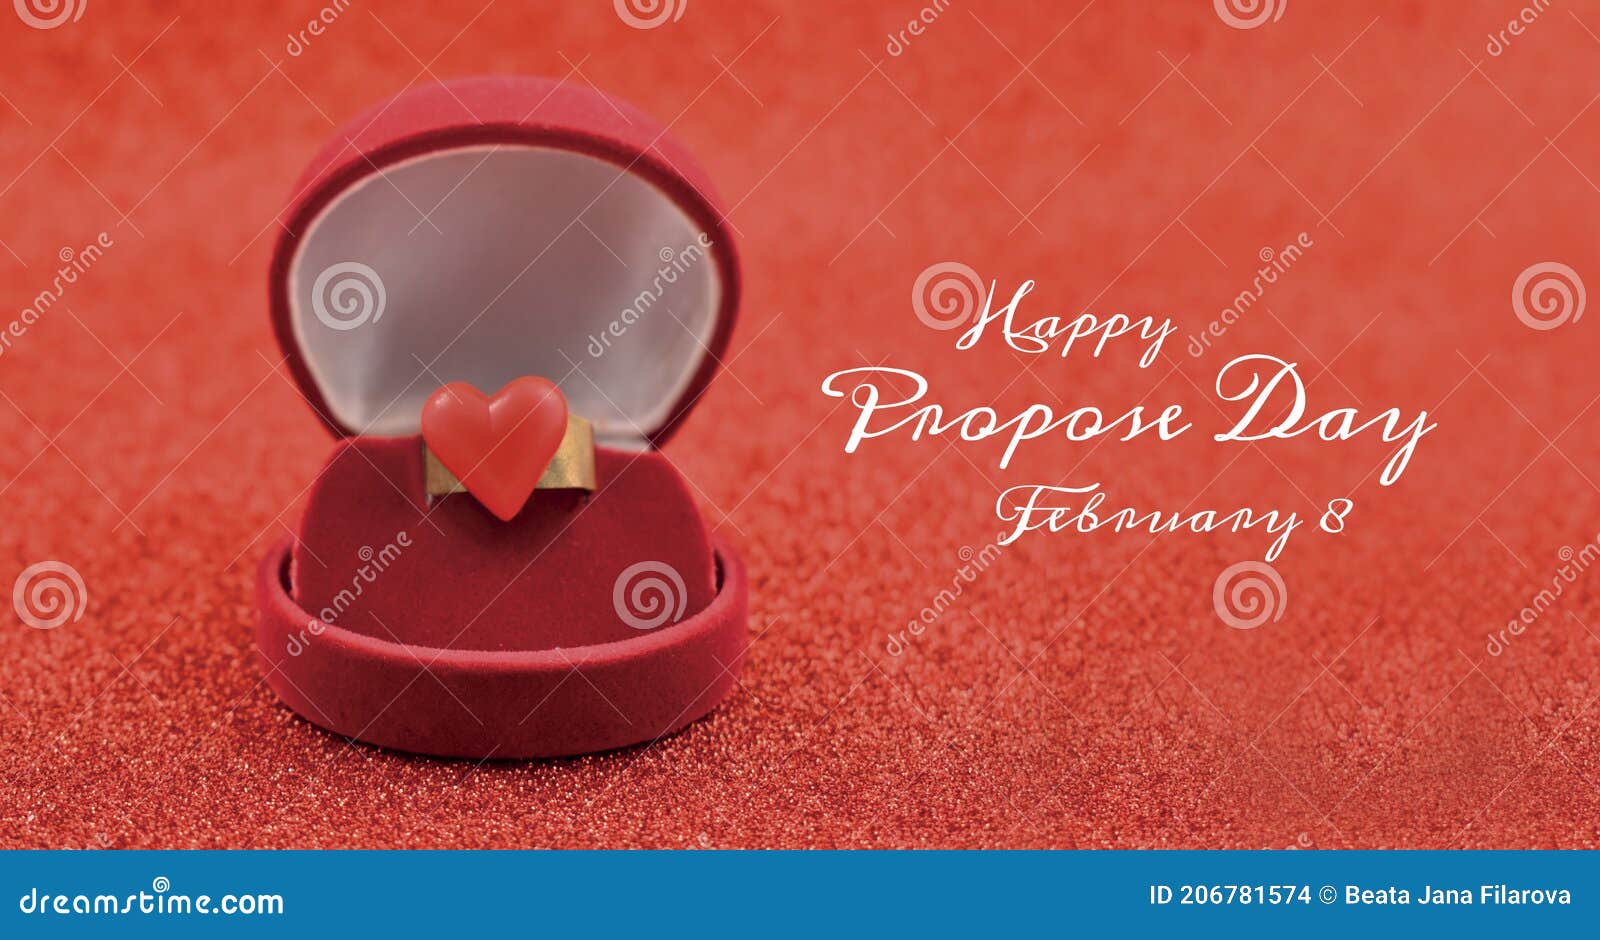 Propose Day Poster with Ring with Red Heart Shape Stock Images ...